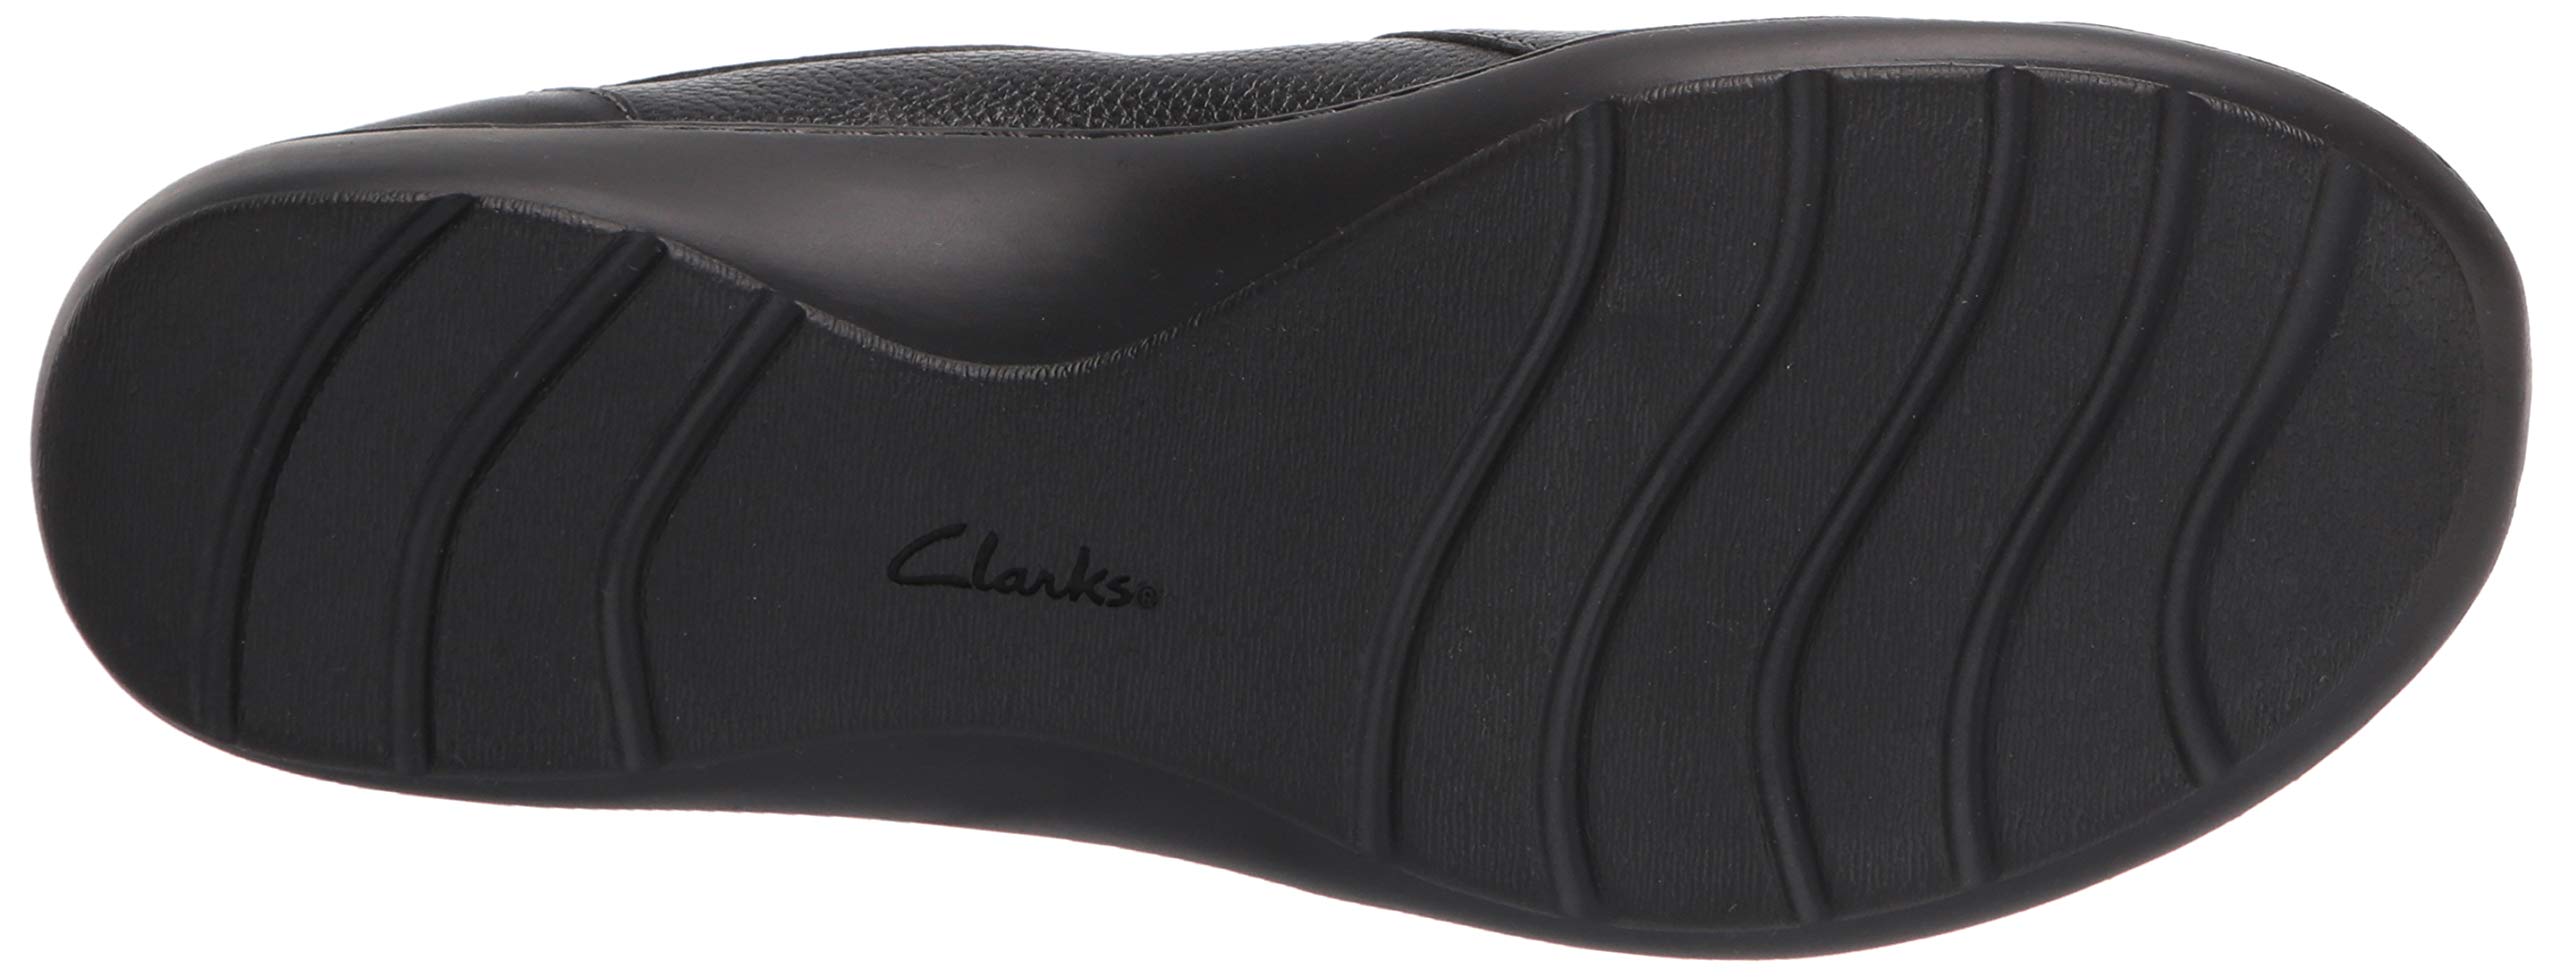 Clarks Women's Cora Giny Loafer Flat